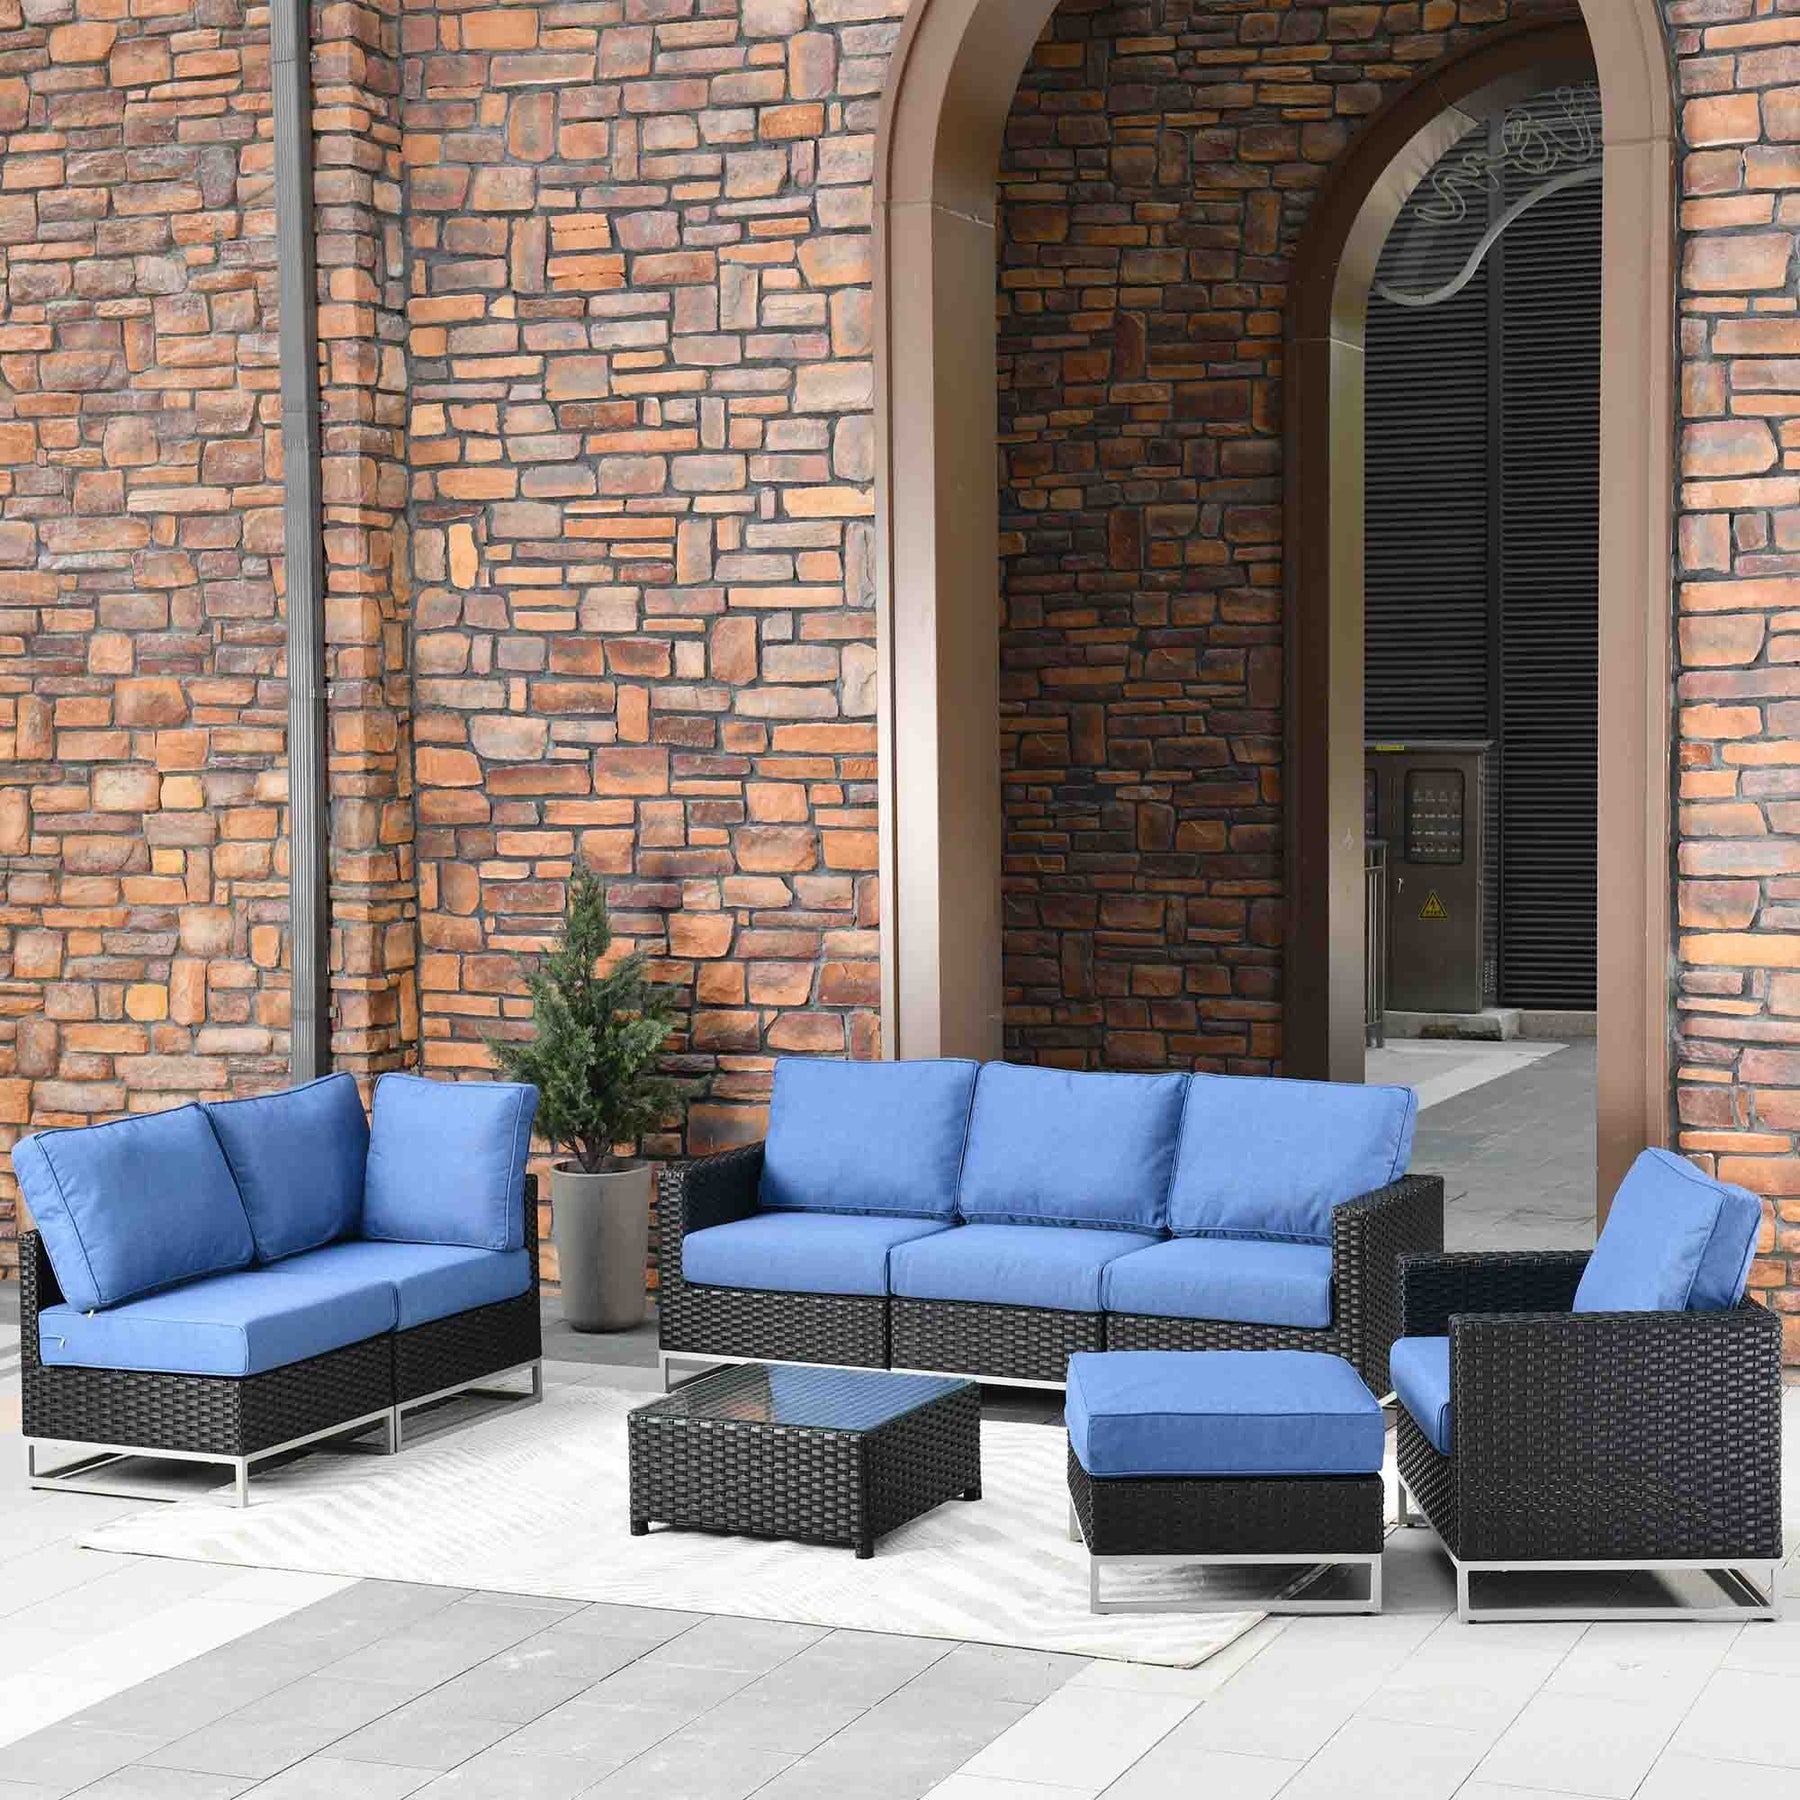 Ovios Patio Furniture Set 8-Piece with Black Wicker, No Assembly Required